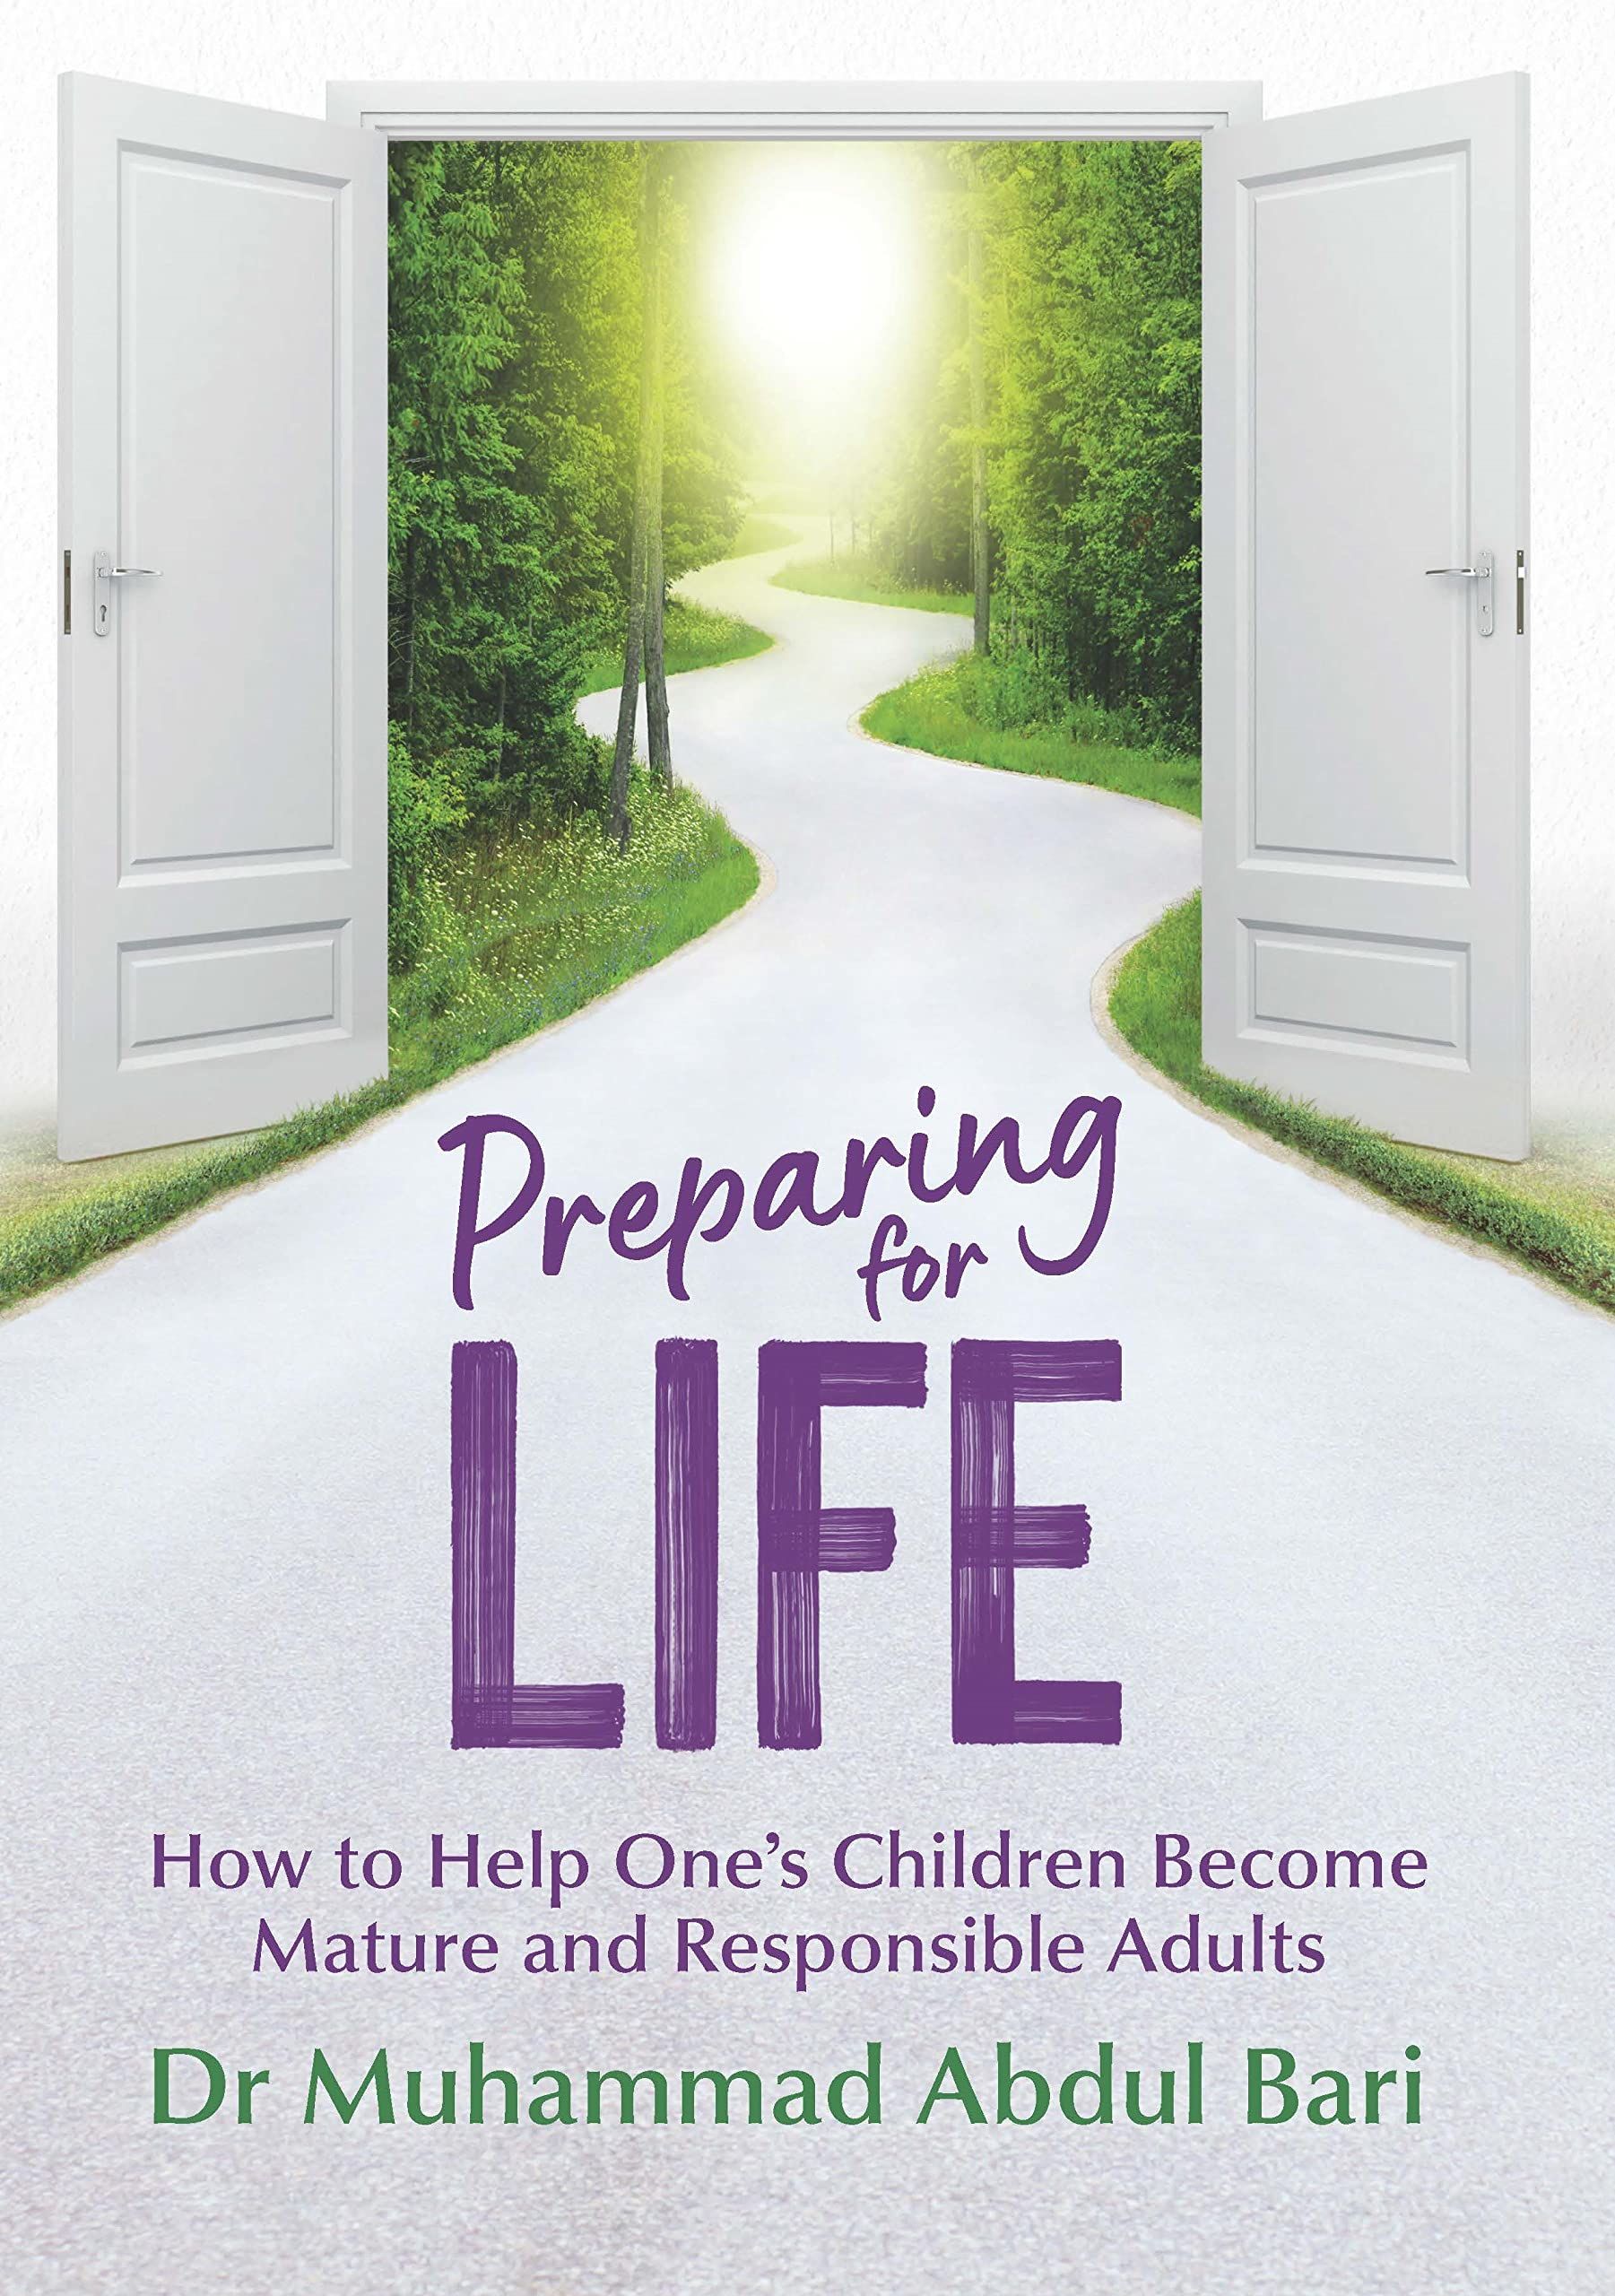 PREPARING FOR LIFE: HOW TO HELP ONE'S CHILDREN BECOME MATURE AND RESPONSIBLE ADULTS